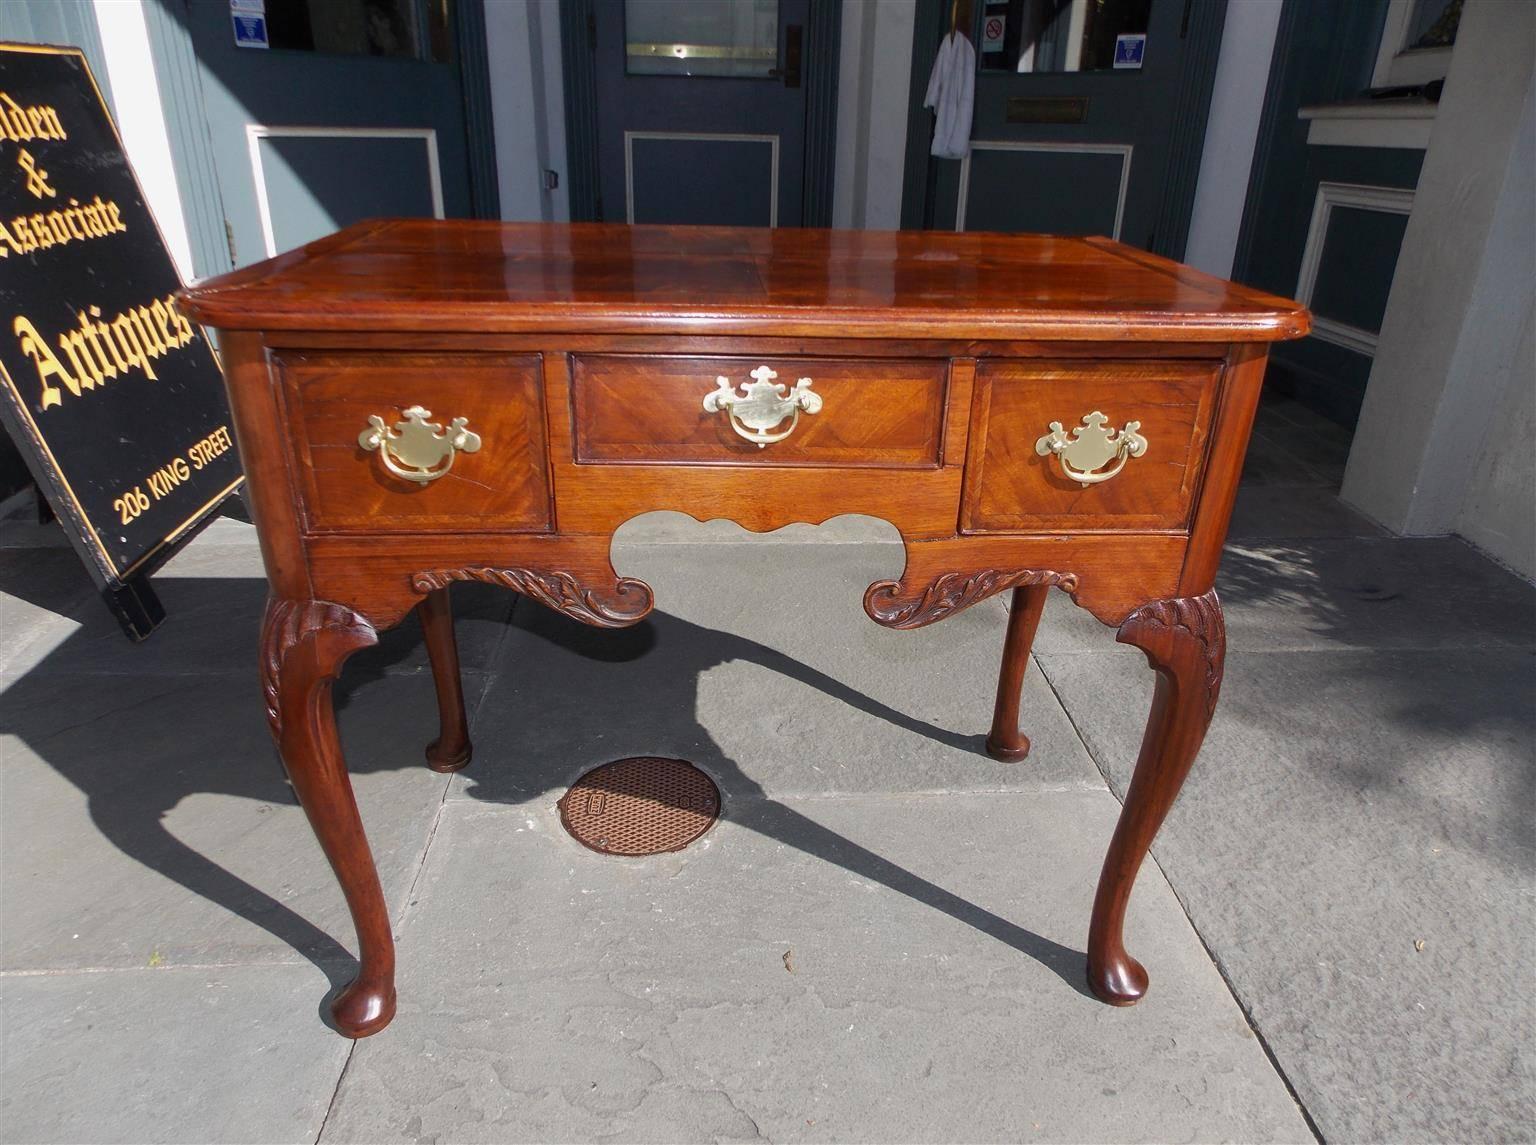 English Queen Anne burl walnut three-drawer low boy with inlaid feather banding, original brasses, acanthus carved serpentine skirt, and terminating on acanthus carved knees with the original pad feet. Mid-18th Century, lowboy is finished on back